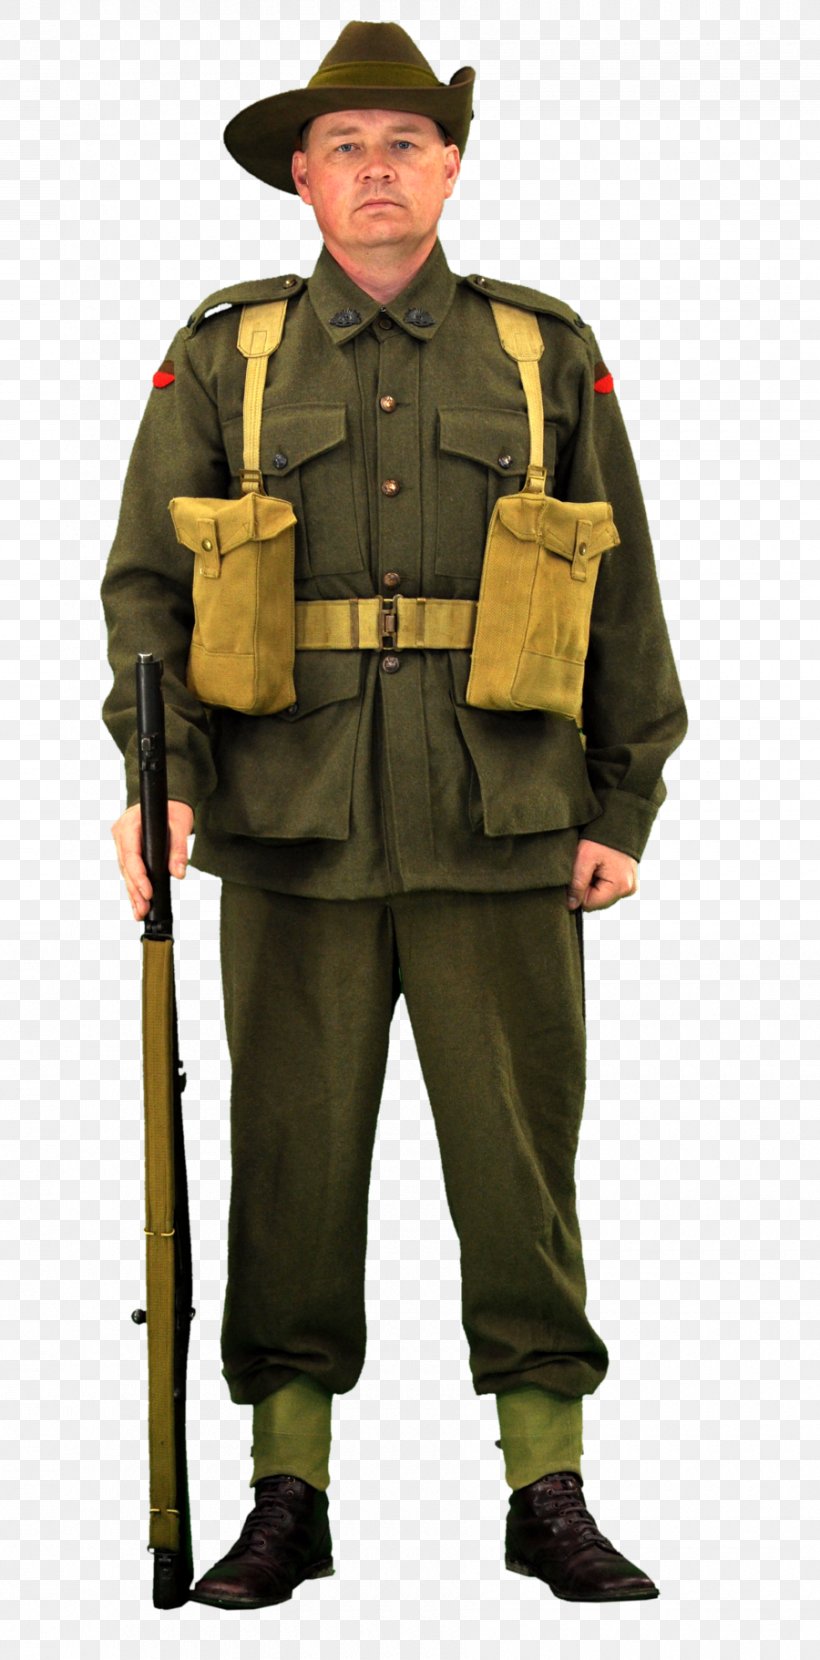 Smedley Butler Soldier Second World War Infantry Military Uniform, PNG, 900x1822px, Soldier, Army, Army Officer, Costume, Infantry Download Free